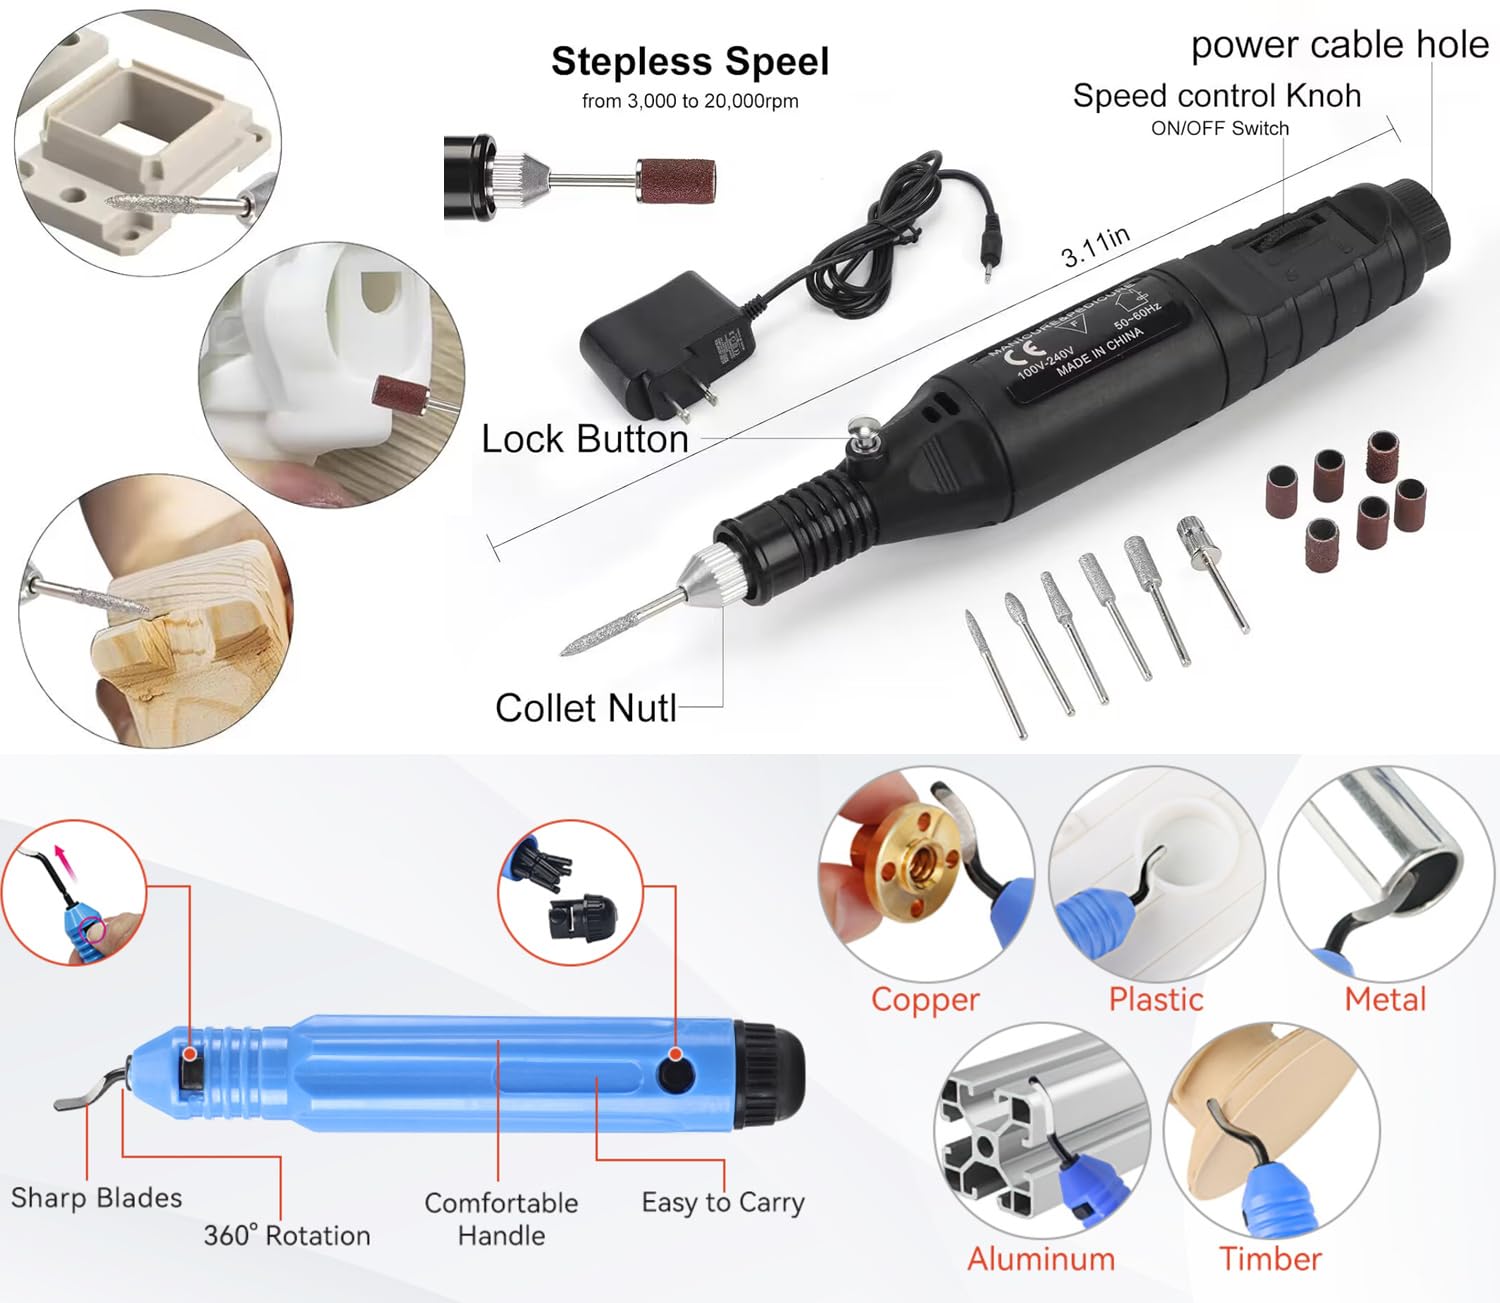 124pcs-3d-printing-accessory-tools-with-tool-bag-for-3d-printer-modeler-basic-tools-diverse-3d-print-nozzle-cleaning-kit-1 124Pcs 3D Printing Accessory Tools Review